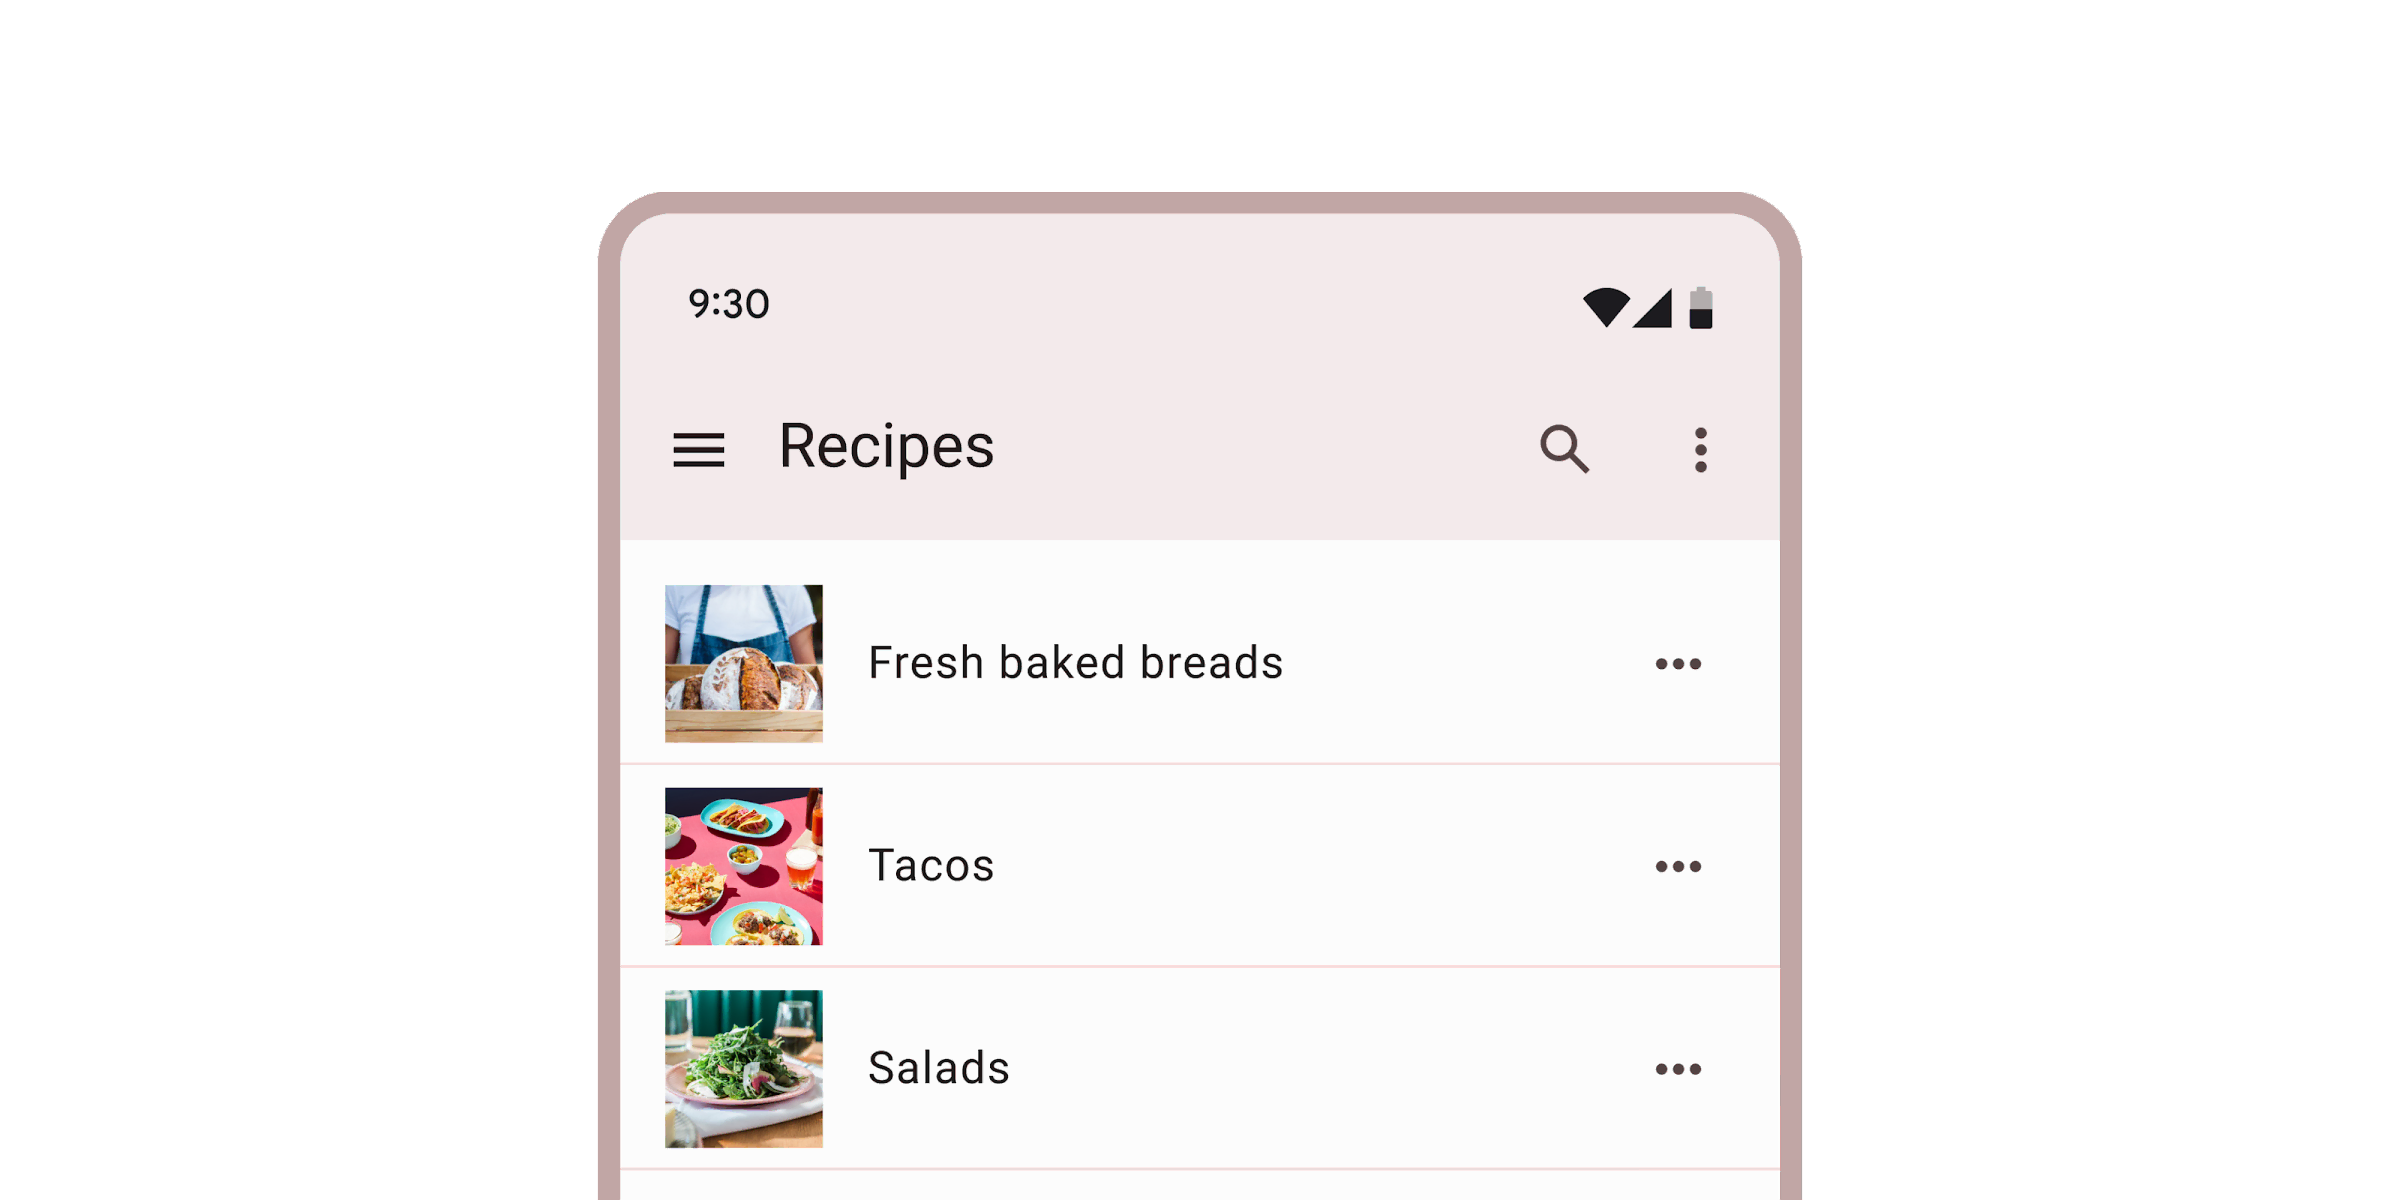 CImage of a mobile phone screen with a Recipies page and a list recipies in a material list. The first item is Fresh baked breads with an image of someone holding bread on the left and a horizontal three dot menu on the right. Then Tacos with an image of tacos and the same three dot menu